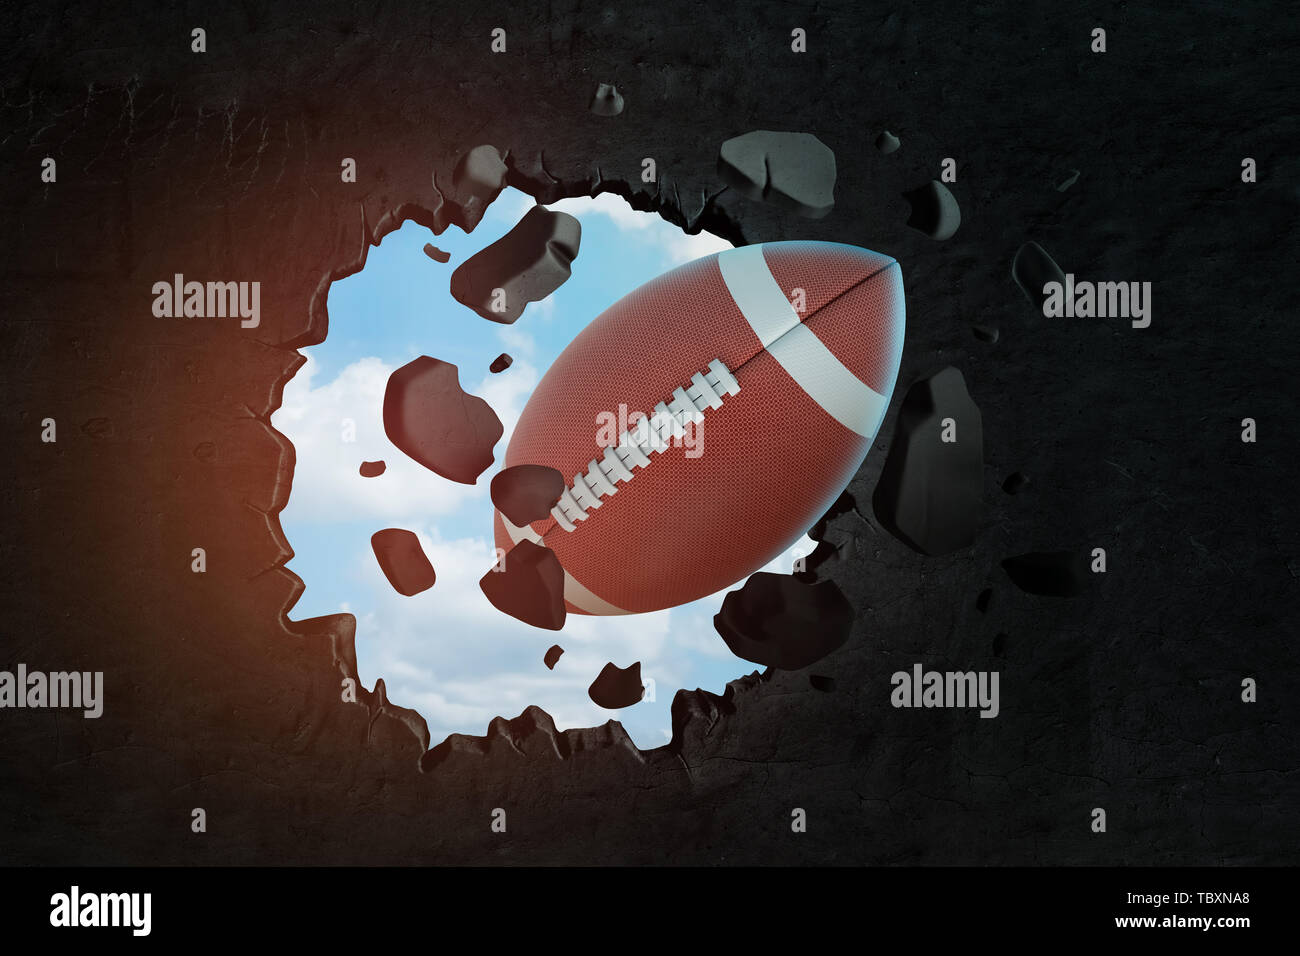 3d closeup rendering of brown oval ball for American football breaking hole in black wall with blue sky seen through hole. Stock Photo